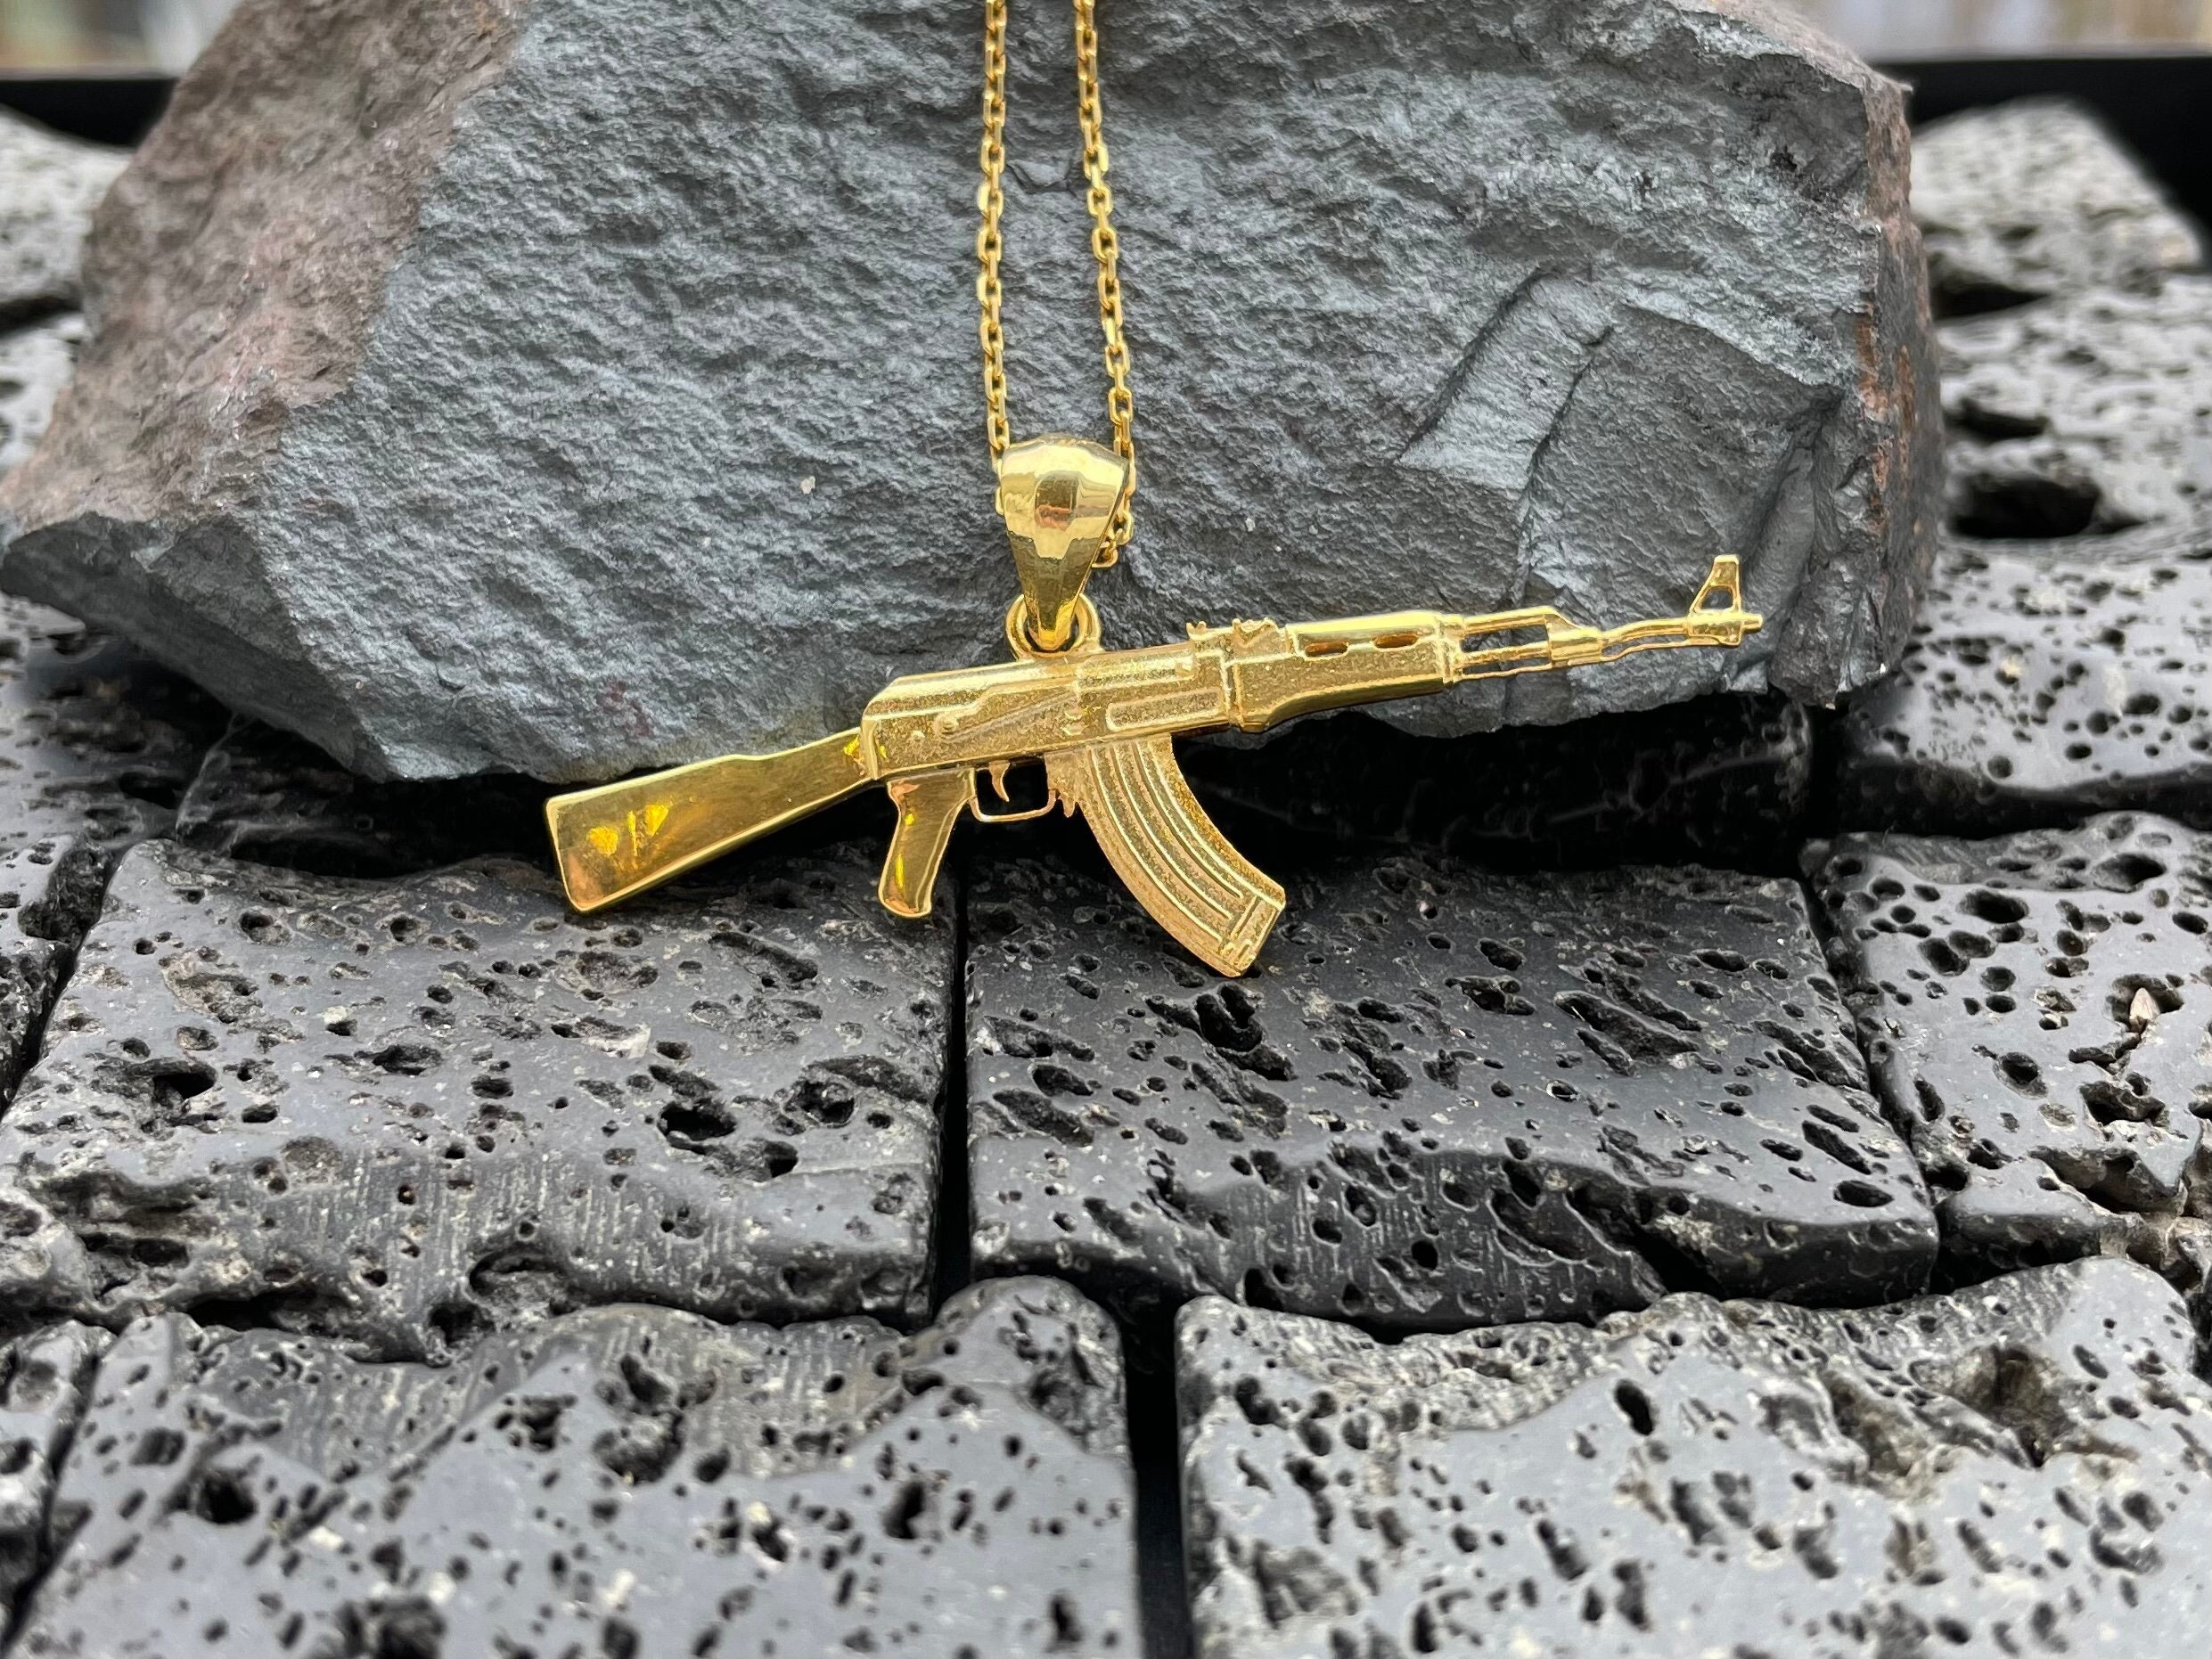 Stainless Steel & Gold Plated Gun AK47 Pendant Necklace Punk Jewelry Chain  | eBay